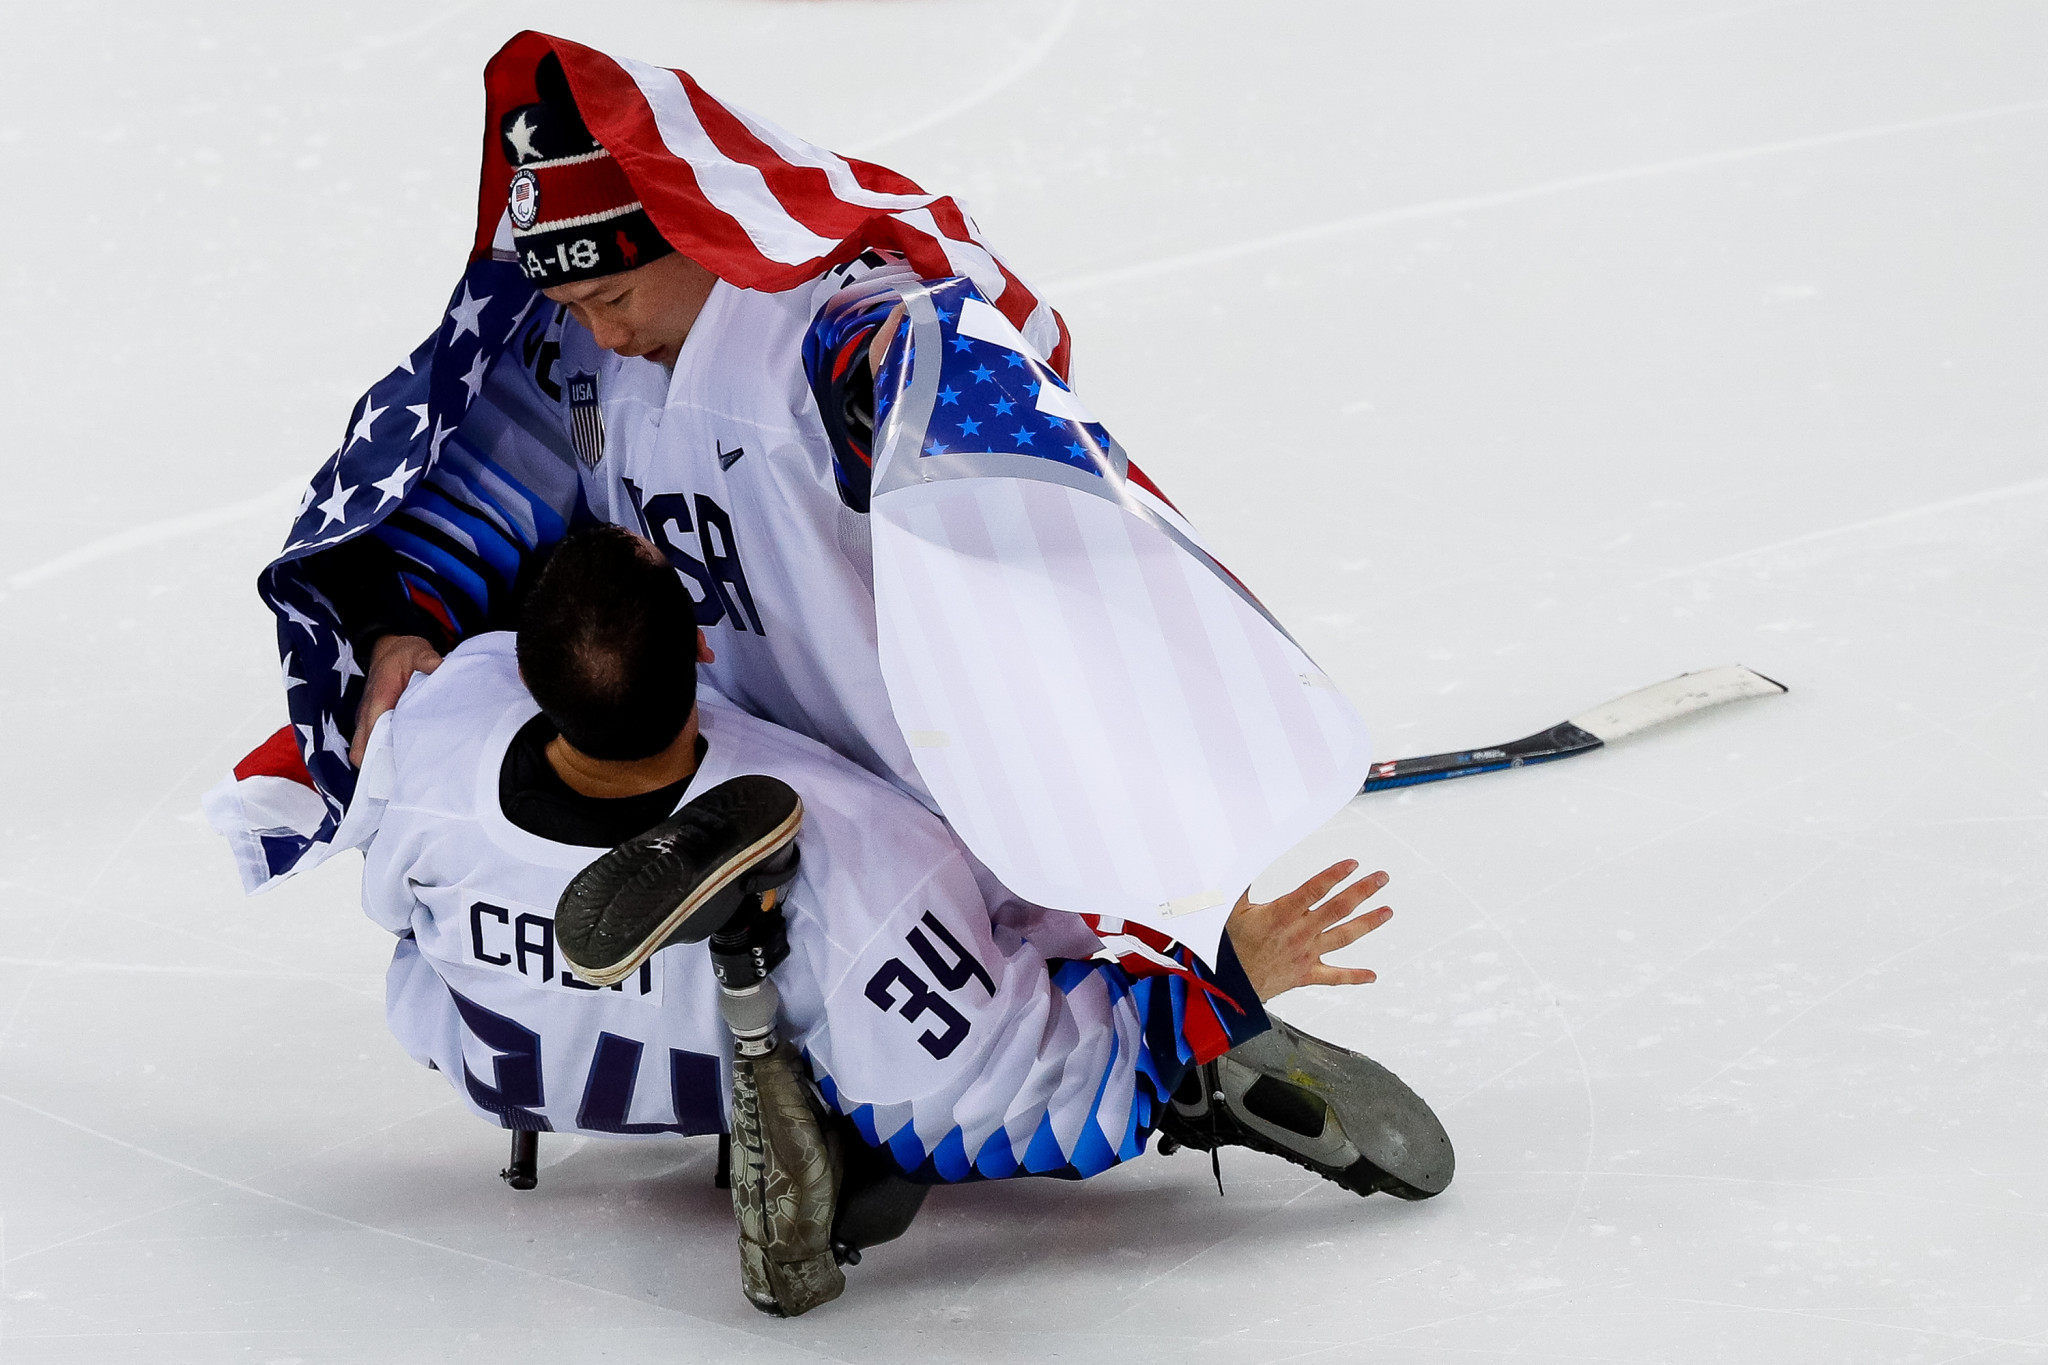 United States goalkeepers Steve Cash and Jen Lee celebrate their side's victory over Canada in the Para-ice hockey final ©Getty Images